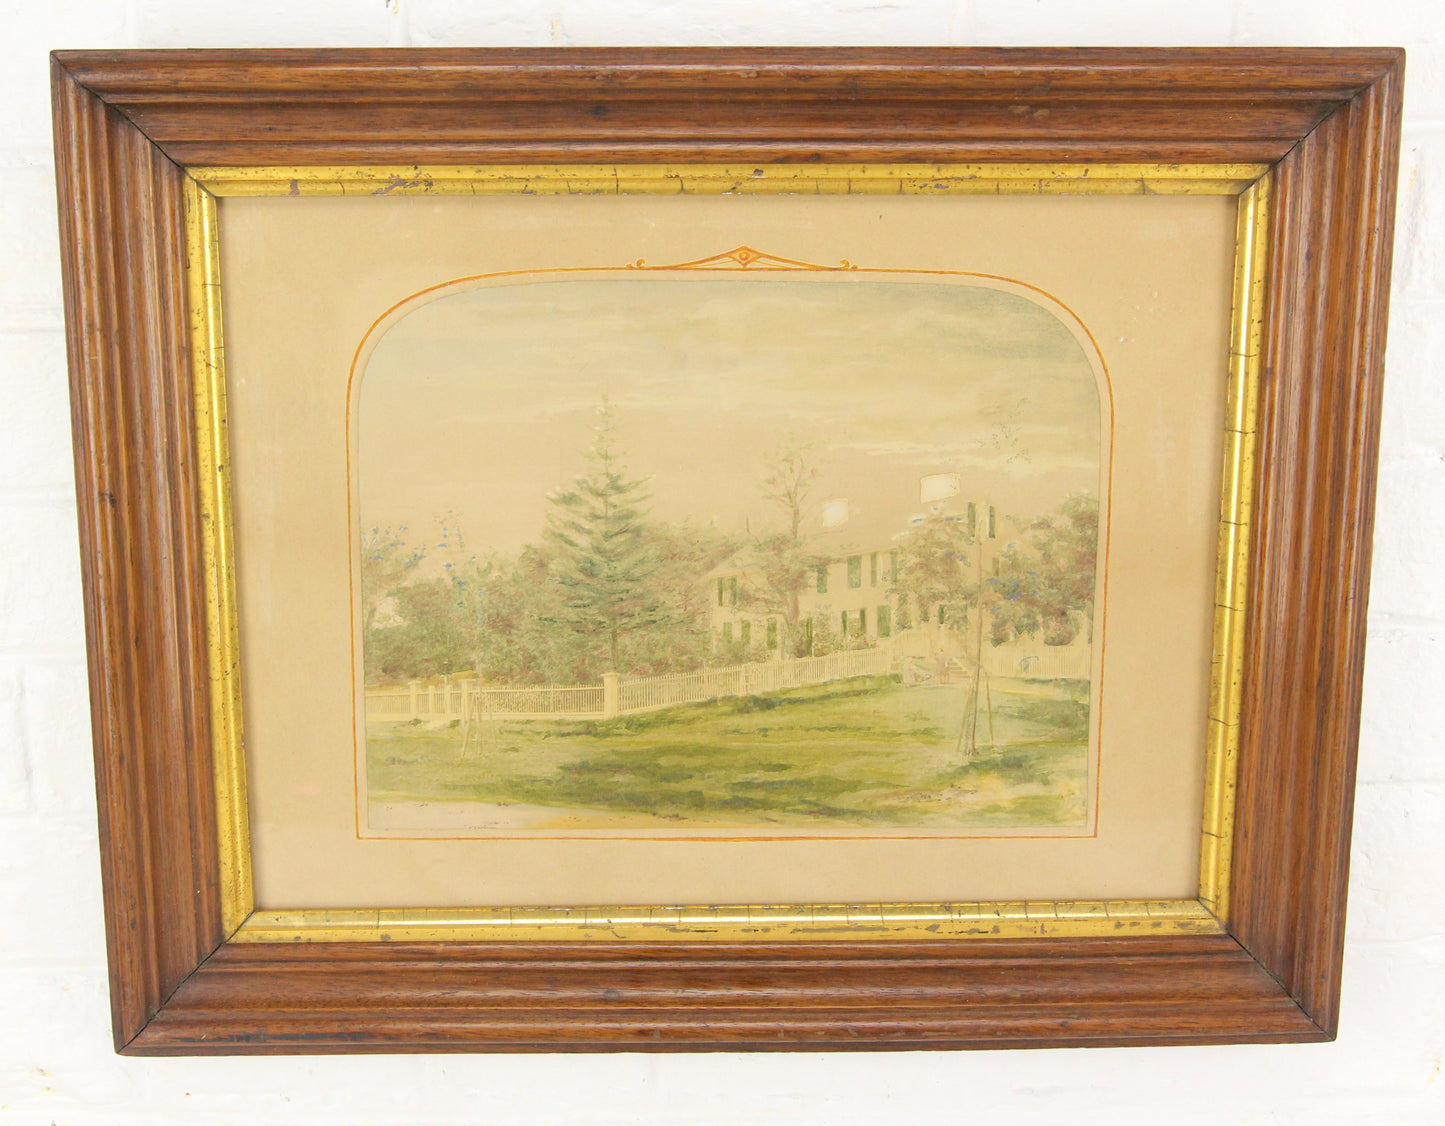 Colored Etching of a New England Home by J.F. Cabot & Brother - 18.5 x 15"